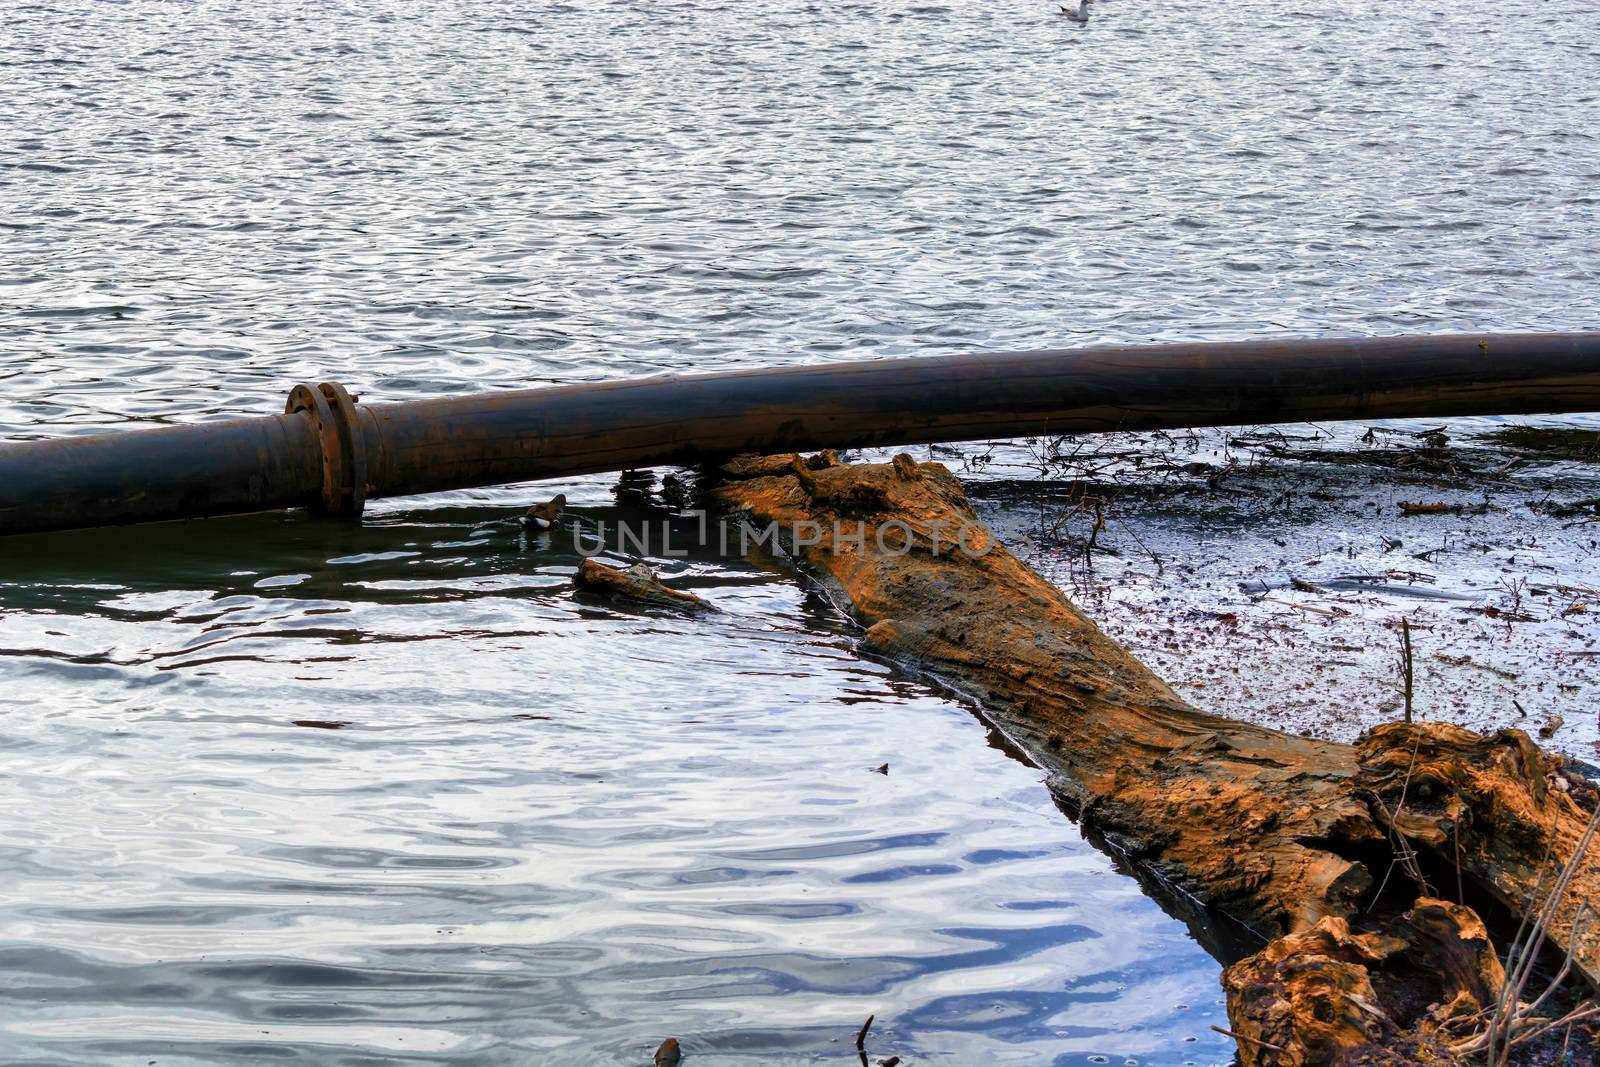 Pipeline, plastic pipes float on the water surface.